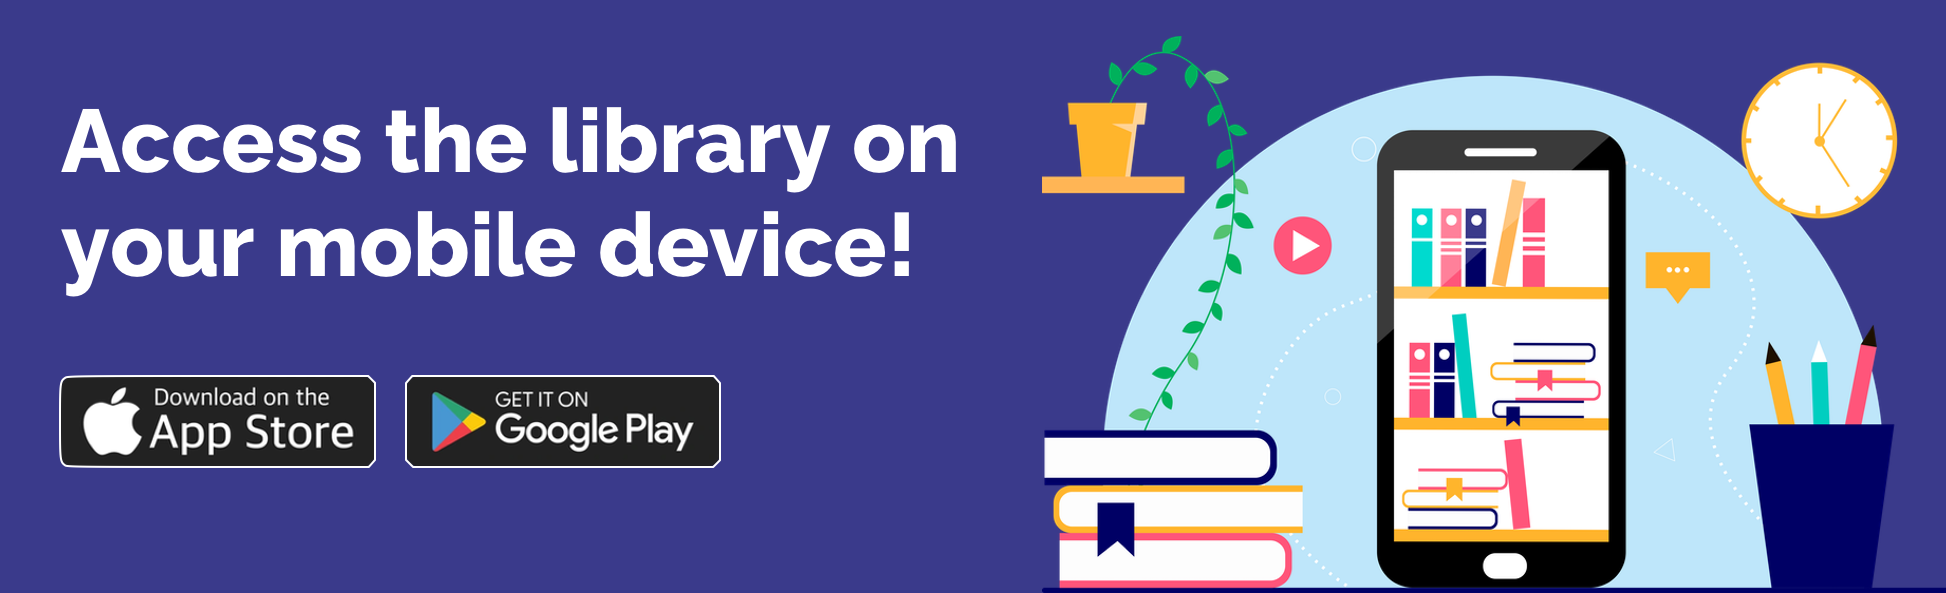 Library app banner.png